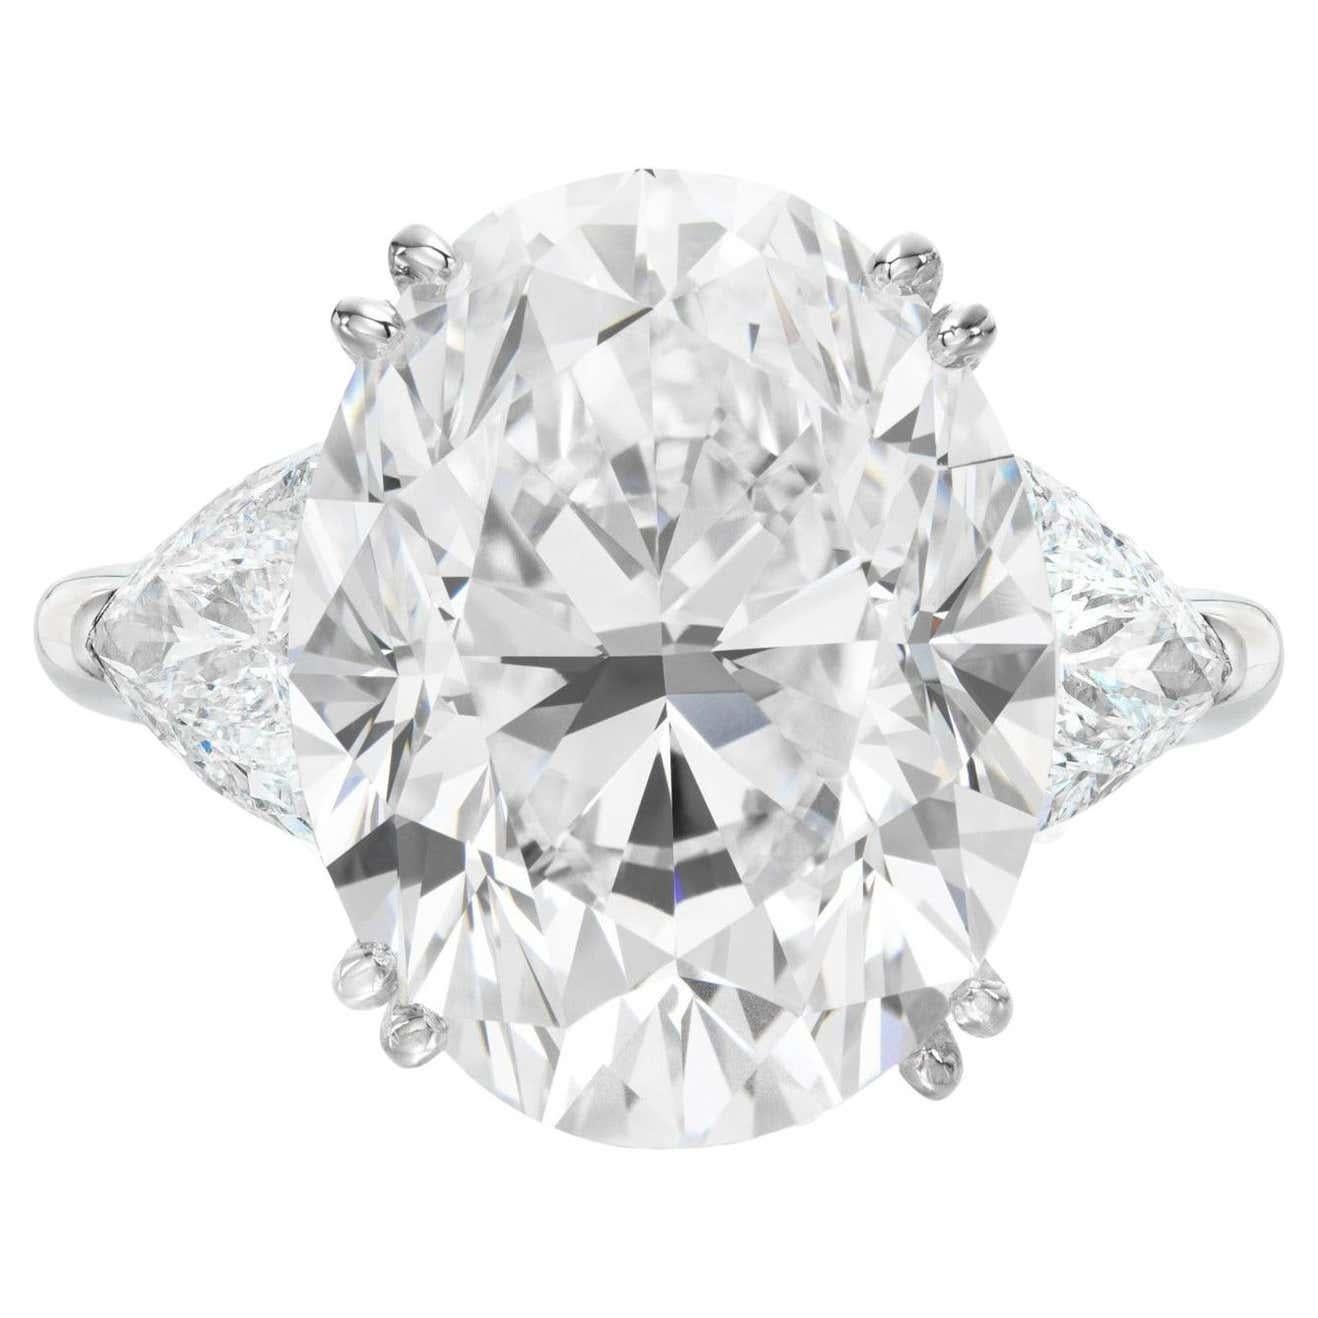 Behold the pinnacle of luxury and sophistication – our extraordinary 10 carat oval diamond, a masterpiece of unparalleled beauty and refinement. Certified by the esteemed Gemological Institute of America (GIA) as a Type IIA Golconda gemstone, this